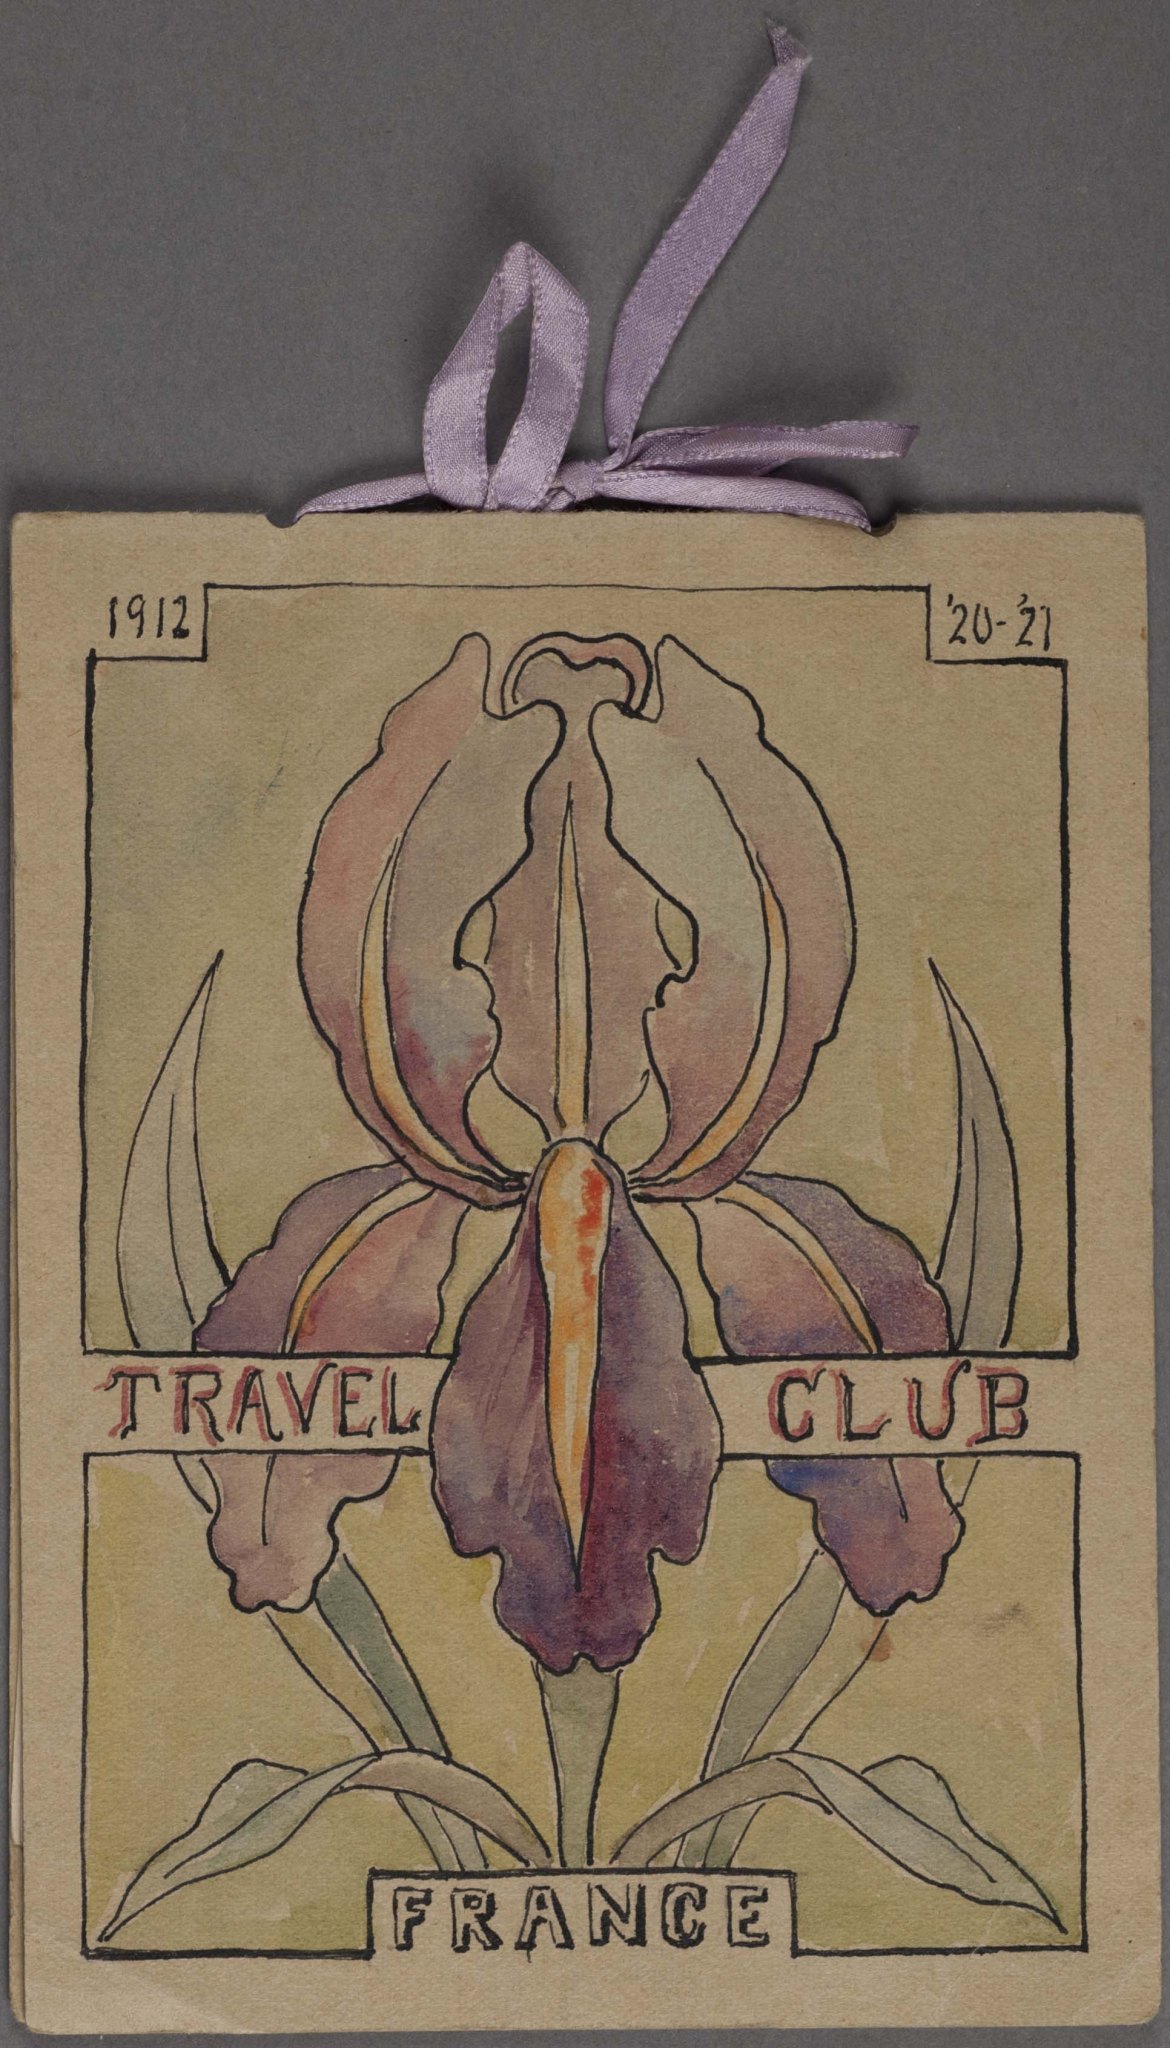 Colored image of logo from the Program of the Travel Club